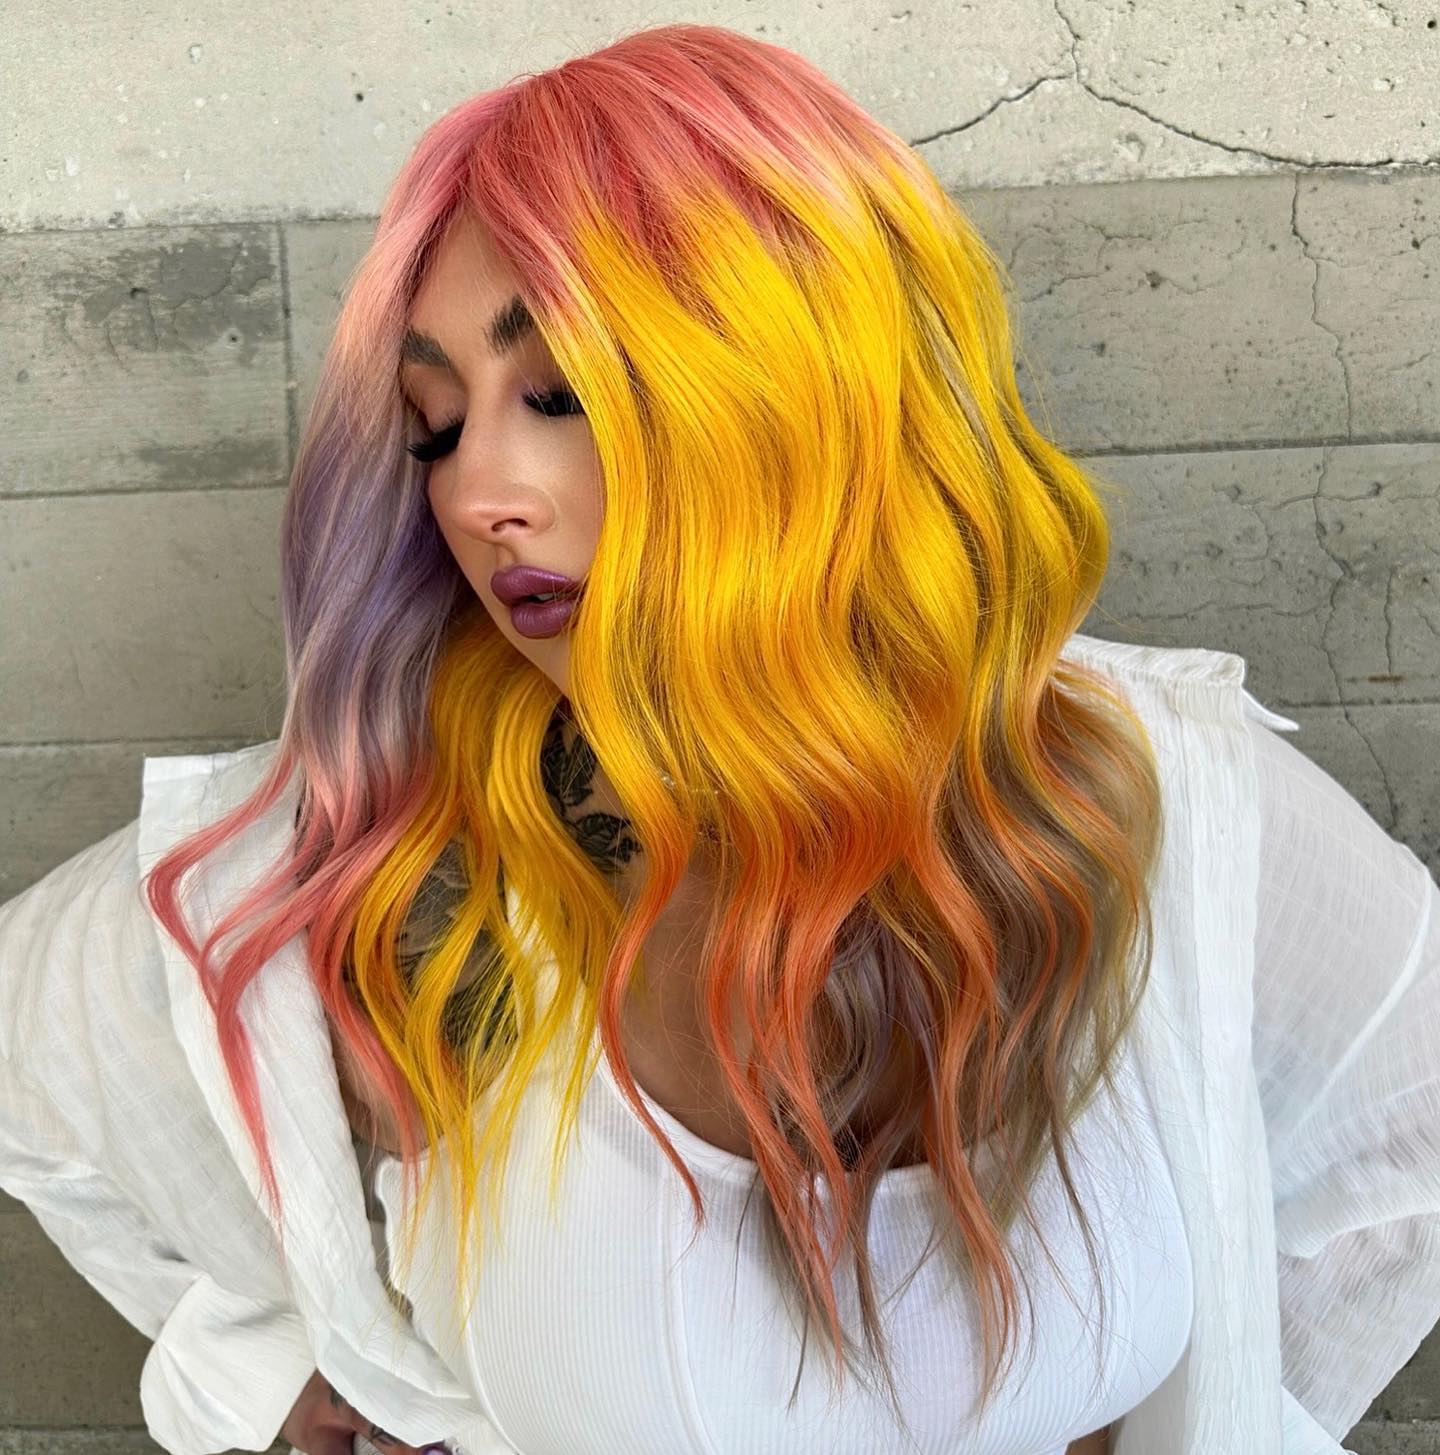 100+ Best Colorful Hair Ideas images 21